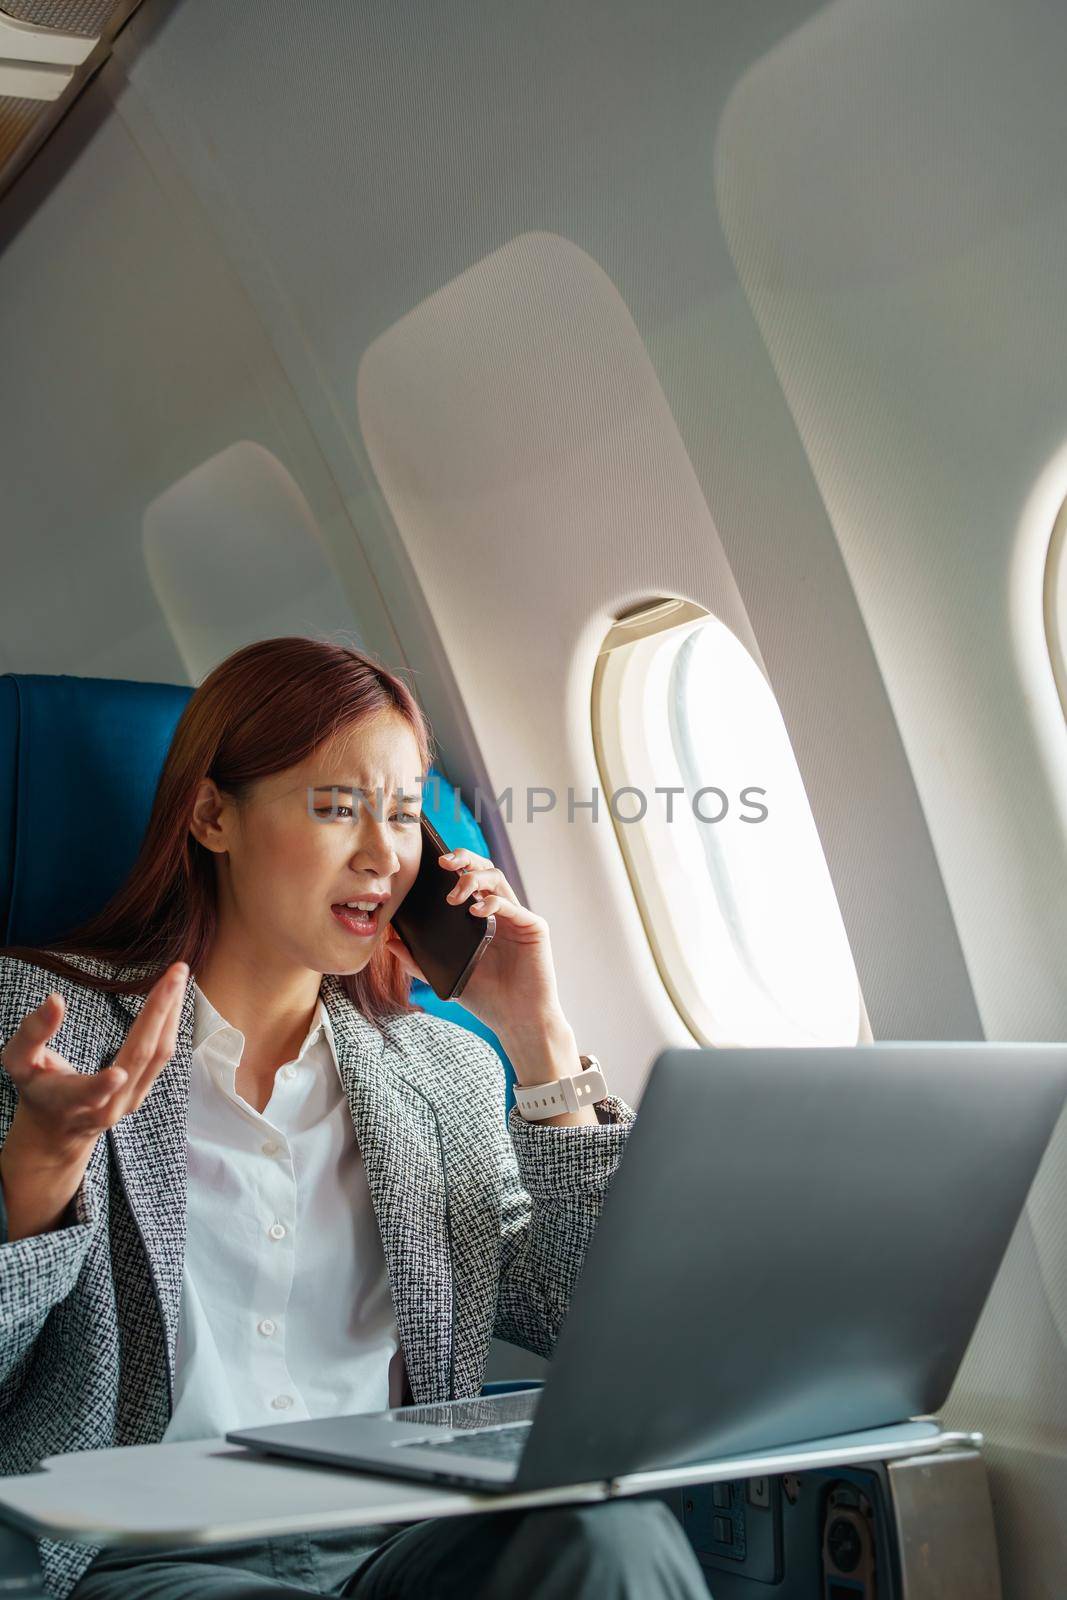 Portrait of a successful Asian businesswoman or entrepreneur in a formal suit on an airplane sitting in business class using a phone, computer laptop with a serious expression during the flight by Manastrong